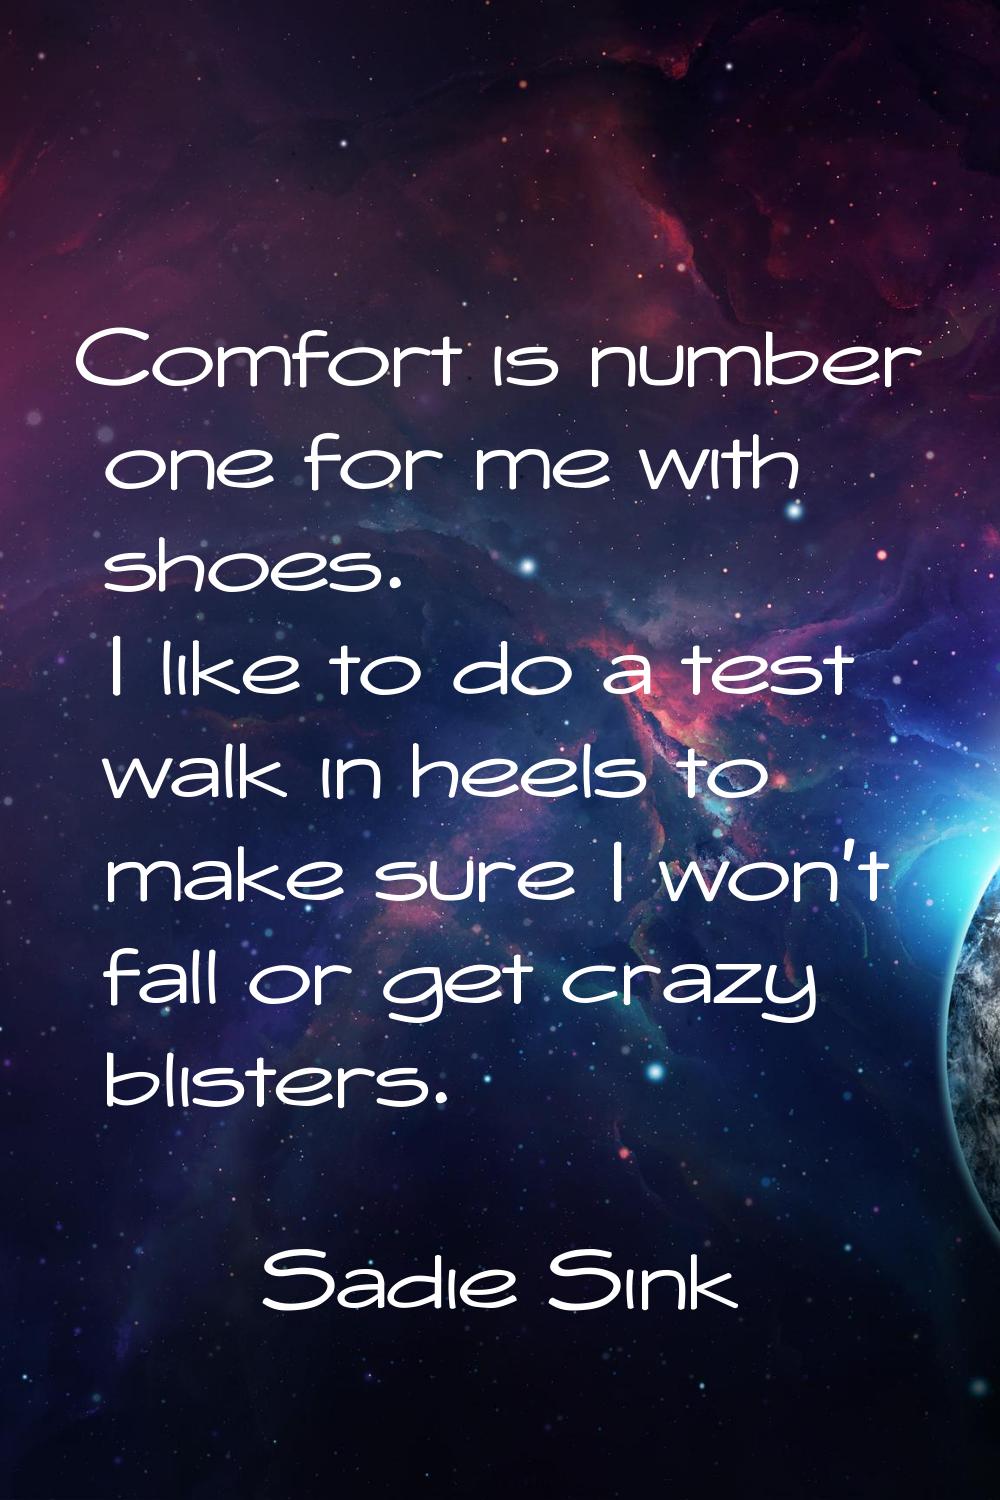 Comfort is number one for me with shoes. I like to do a test walk in heels to make sure I won't fal